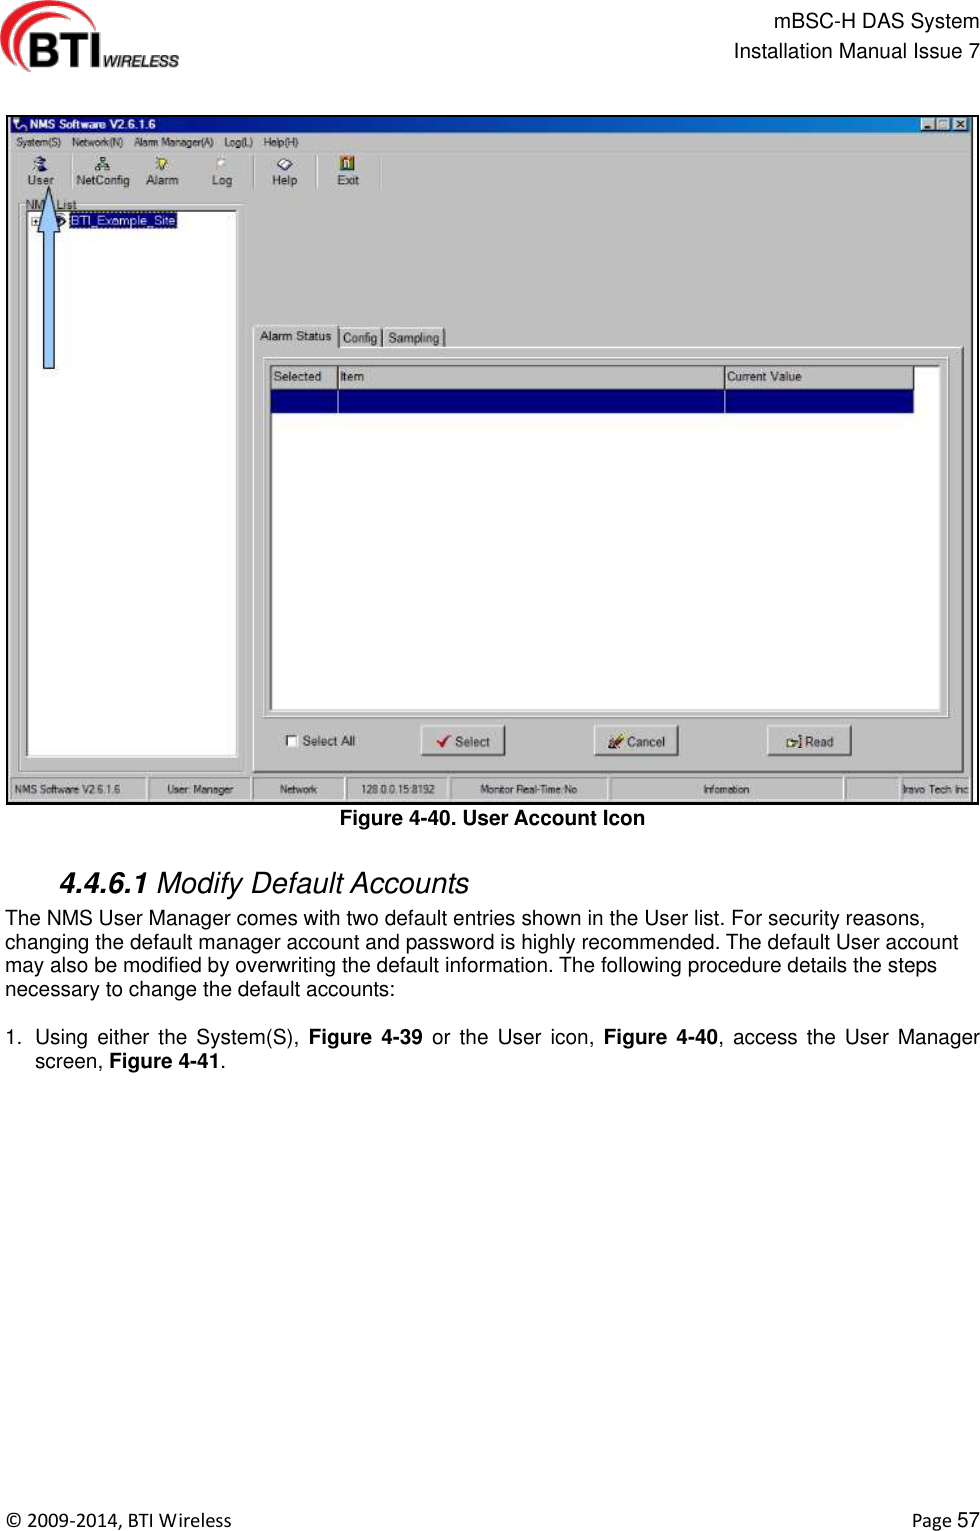                                                   mBSC-H DAS System   Installation Manual Issue 7  ©  2009-2014, BTI Wireless    Page 57  Figure 4-40. User Account Icon   4.4.6.1 Modify Default Accounts The NMS User Manager comes with two default entries shown in the User list. For security reasons, changing the default manager account and password is highly recommended. The default User account may also be modified by overwriting the default information. The following procedure details the steps necessary to change the default accounts:  1.  Using either  the  System(S),  Figure 4-39 or  the  User  icon,  Figure 4-40, access the  User  Manager screen, Figure 4-41.  